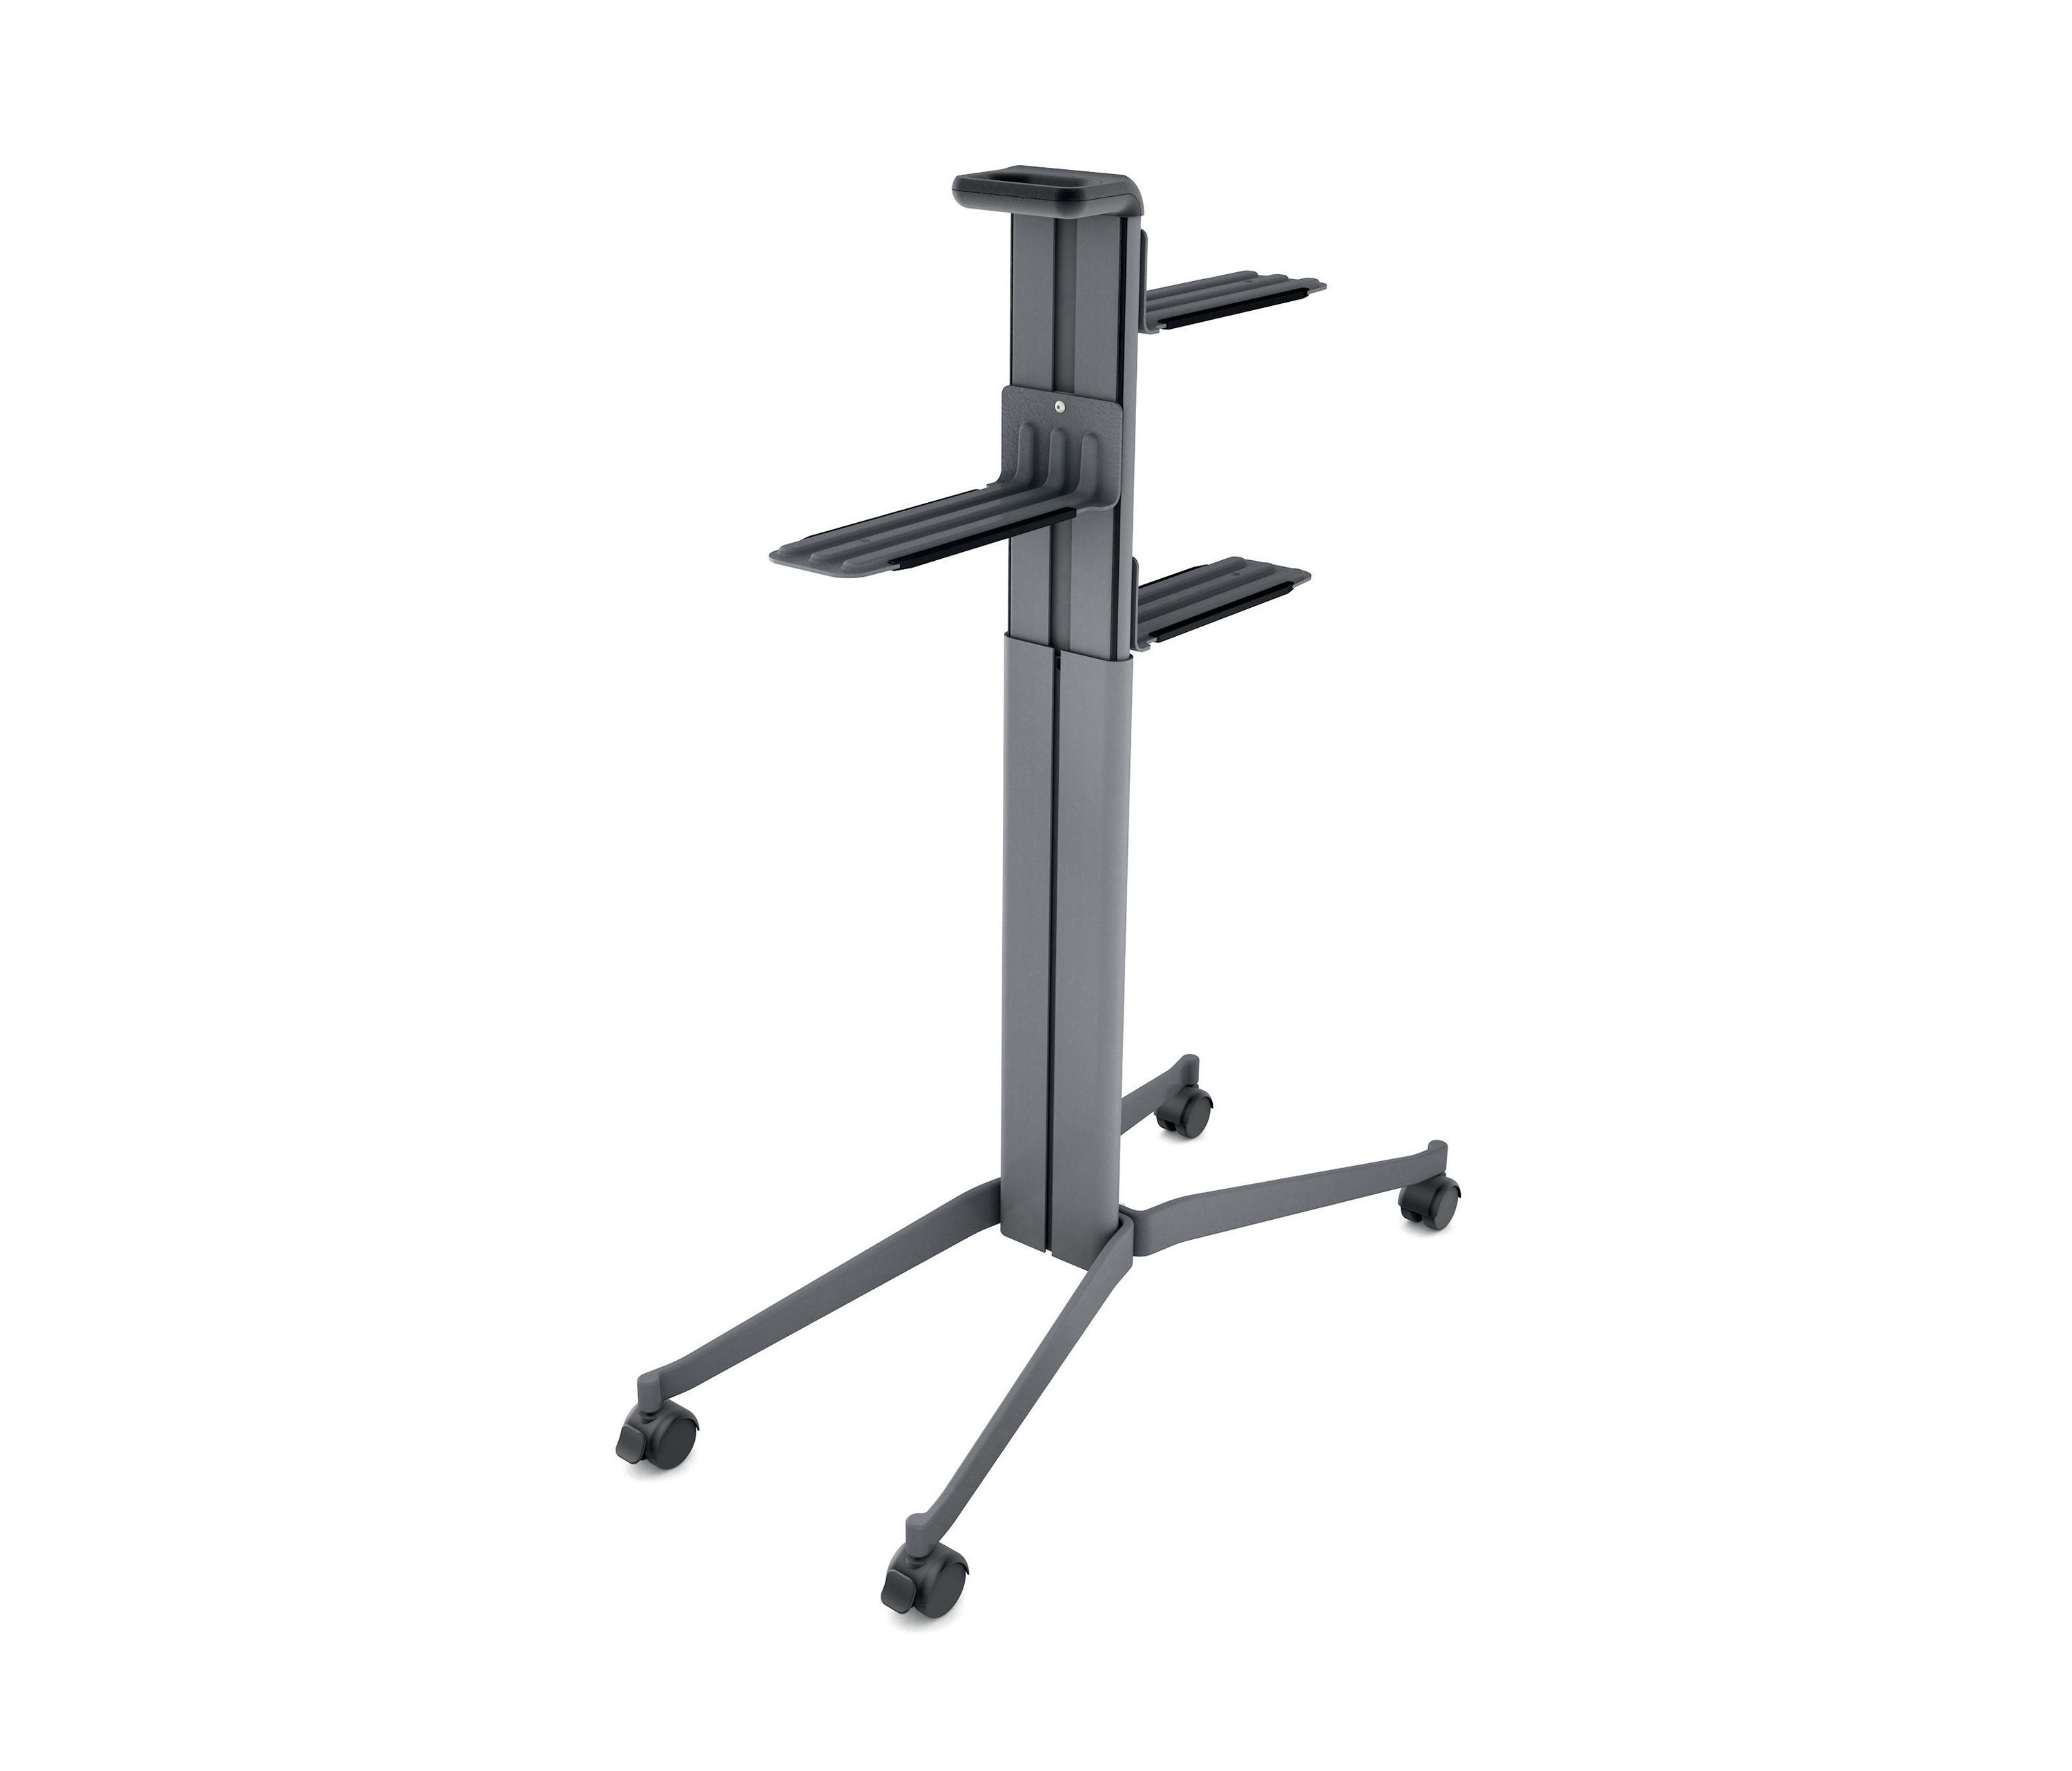 Meeting Office Caddy, mobile pedestal